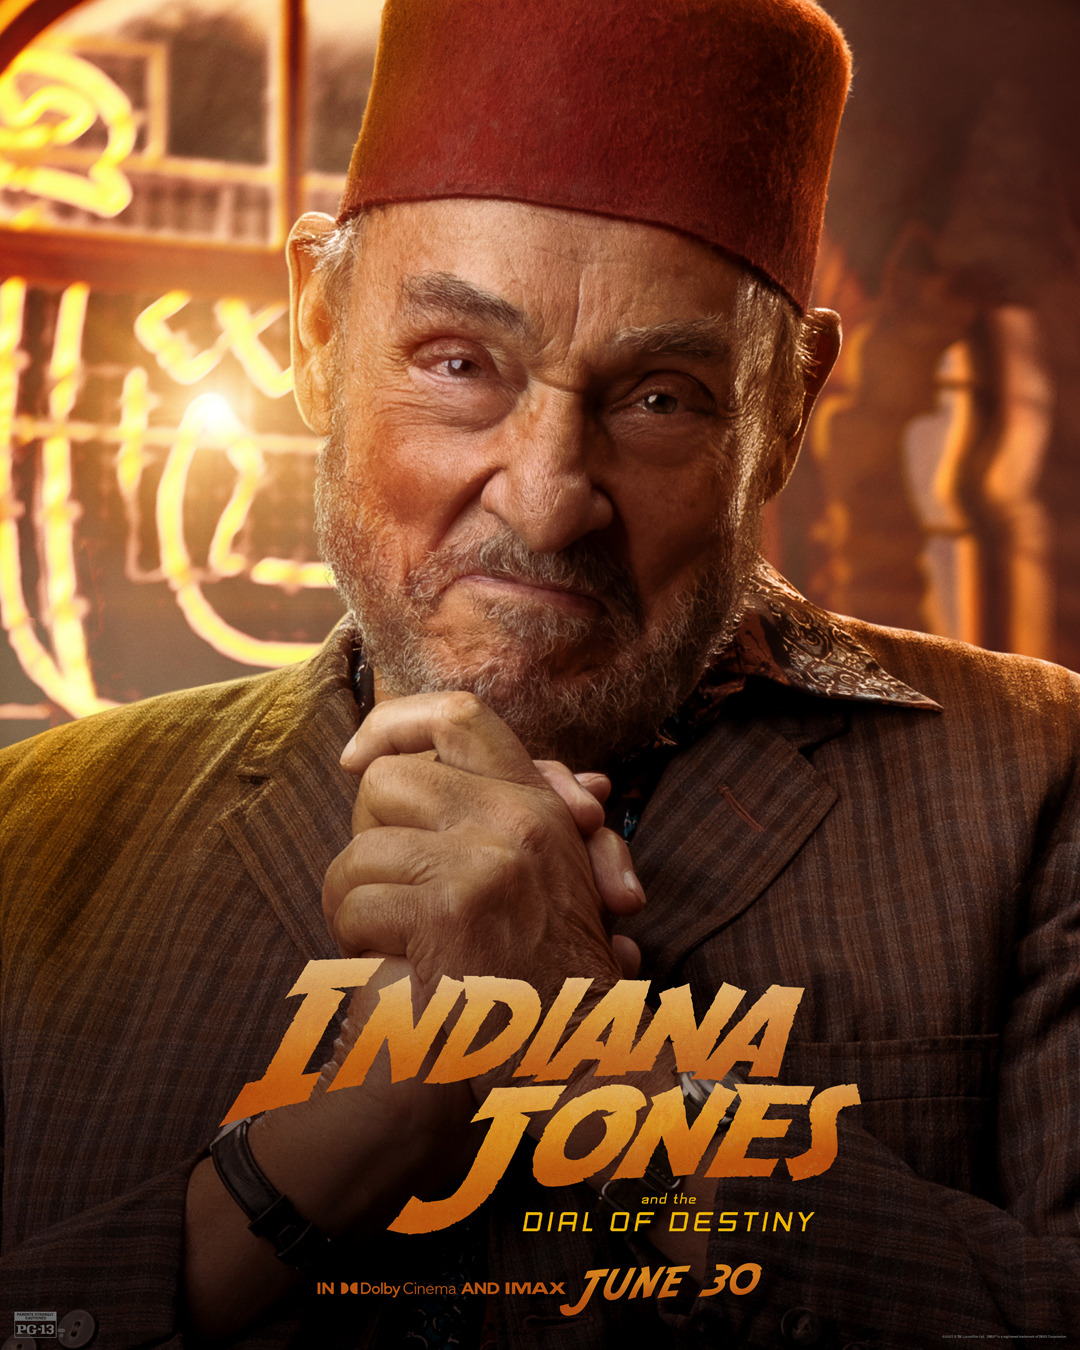 Extra Large Movie Poster Image for Indiana Jones and the Dial of Destiny (#16 of 16)